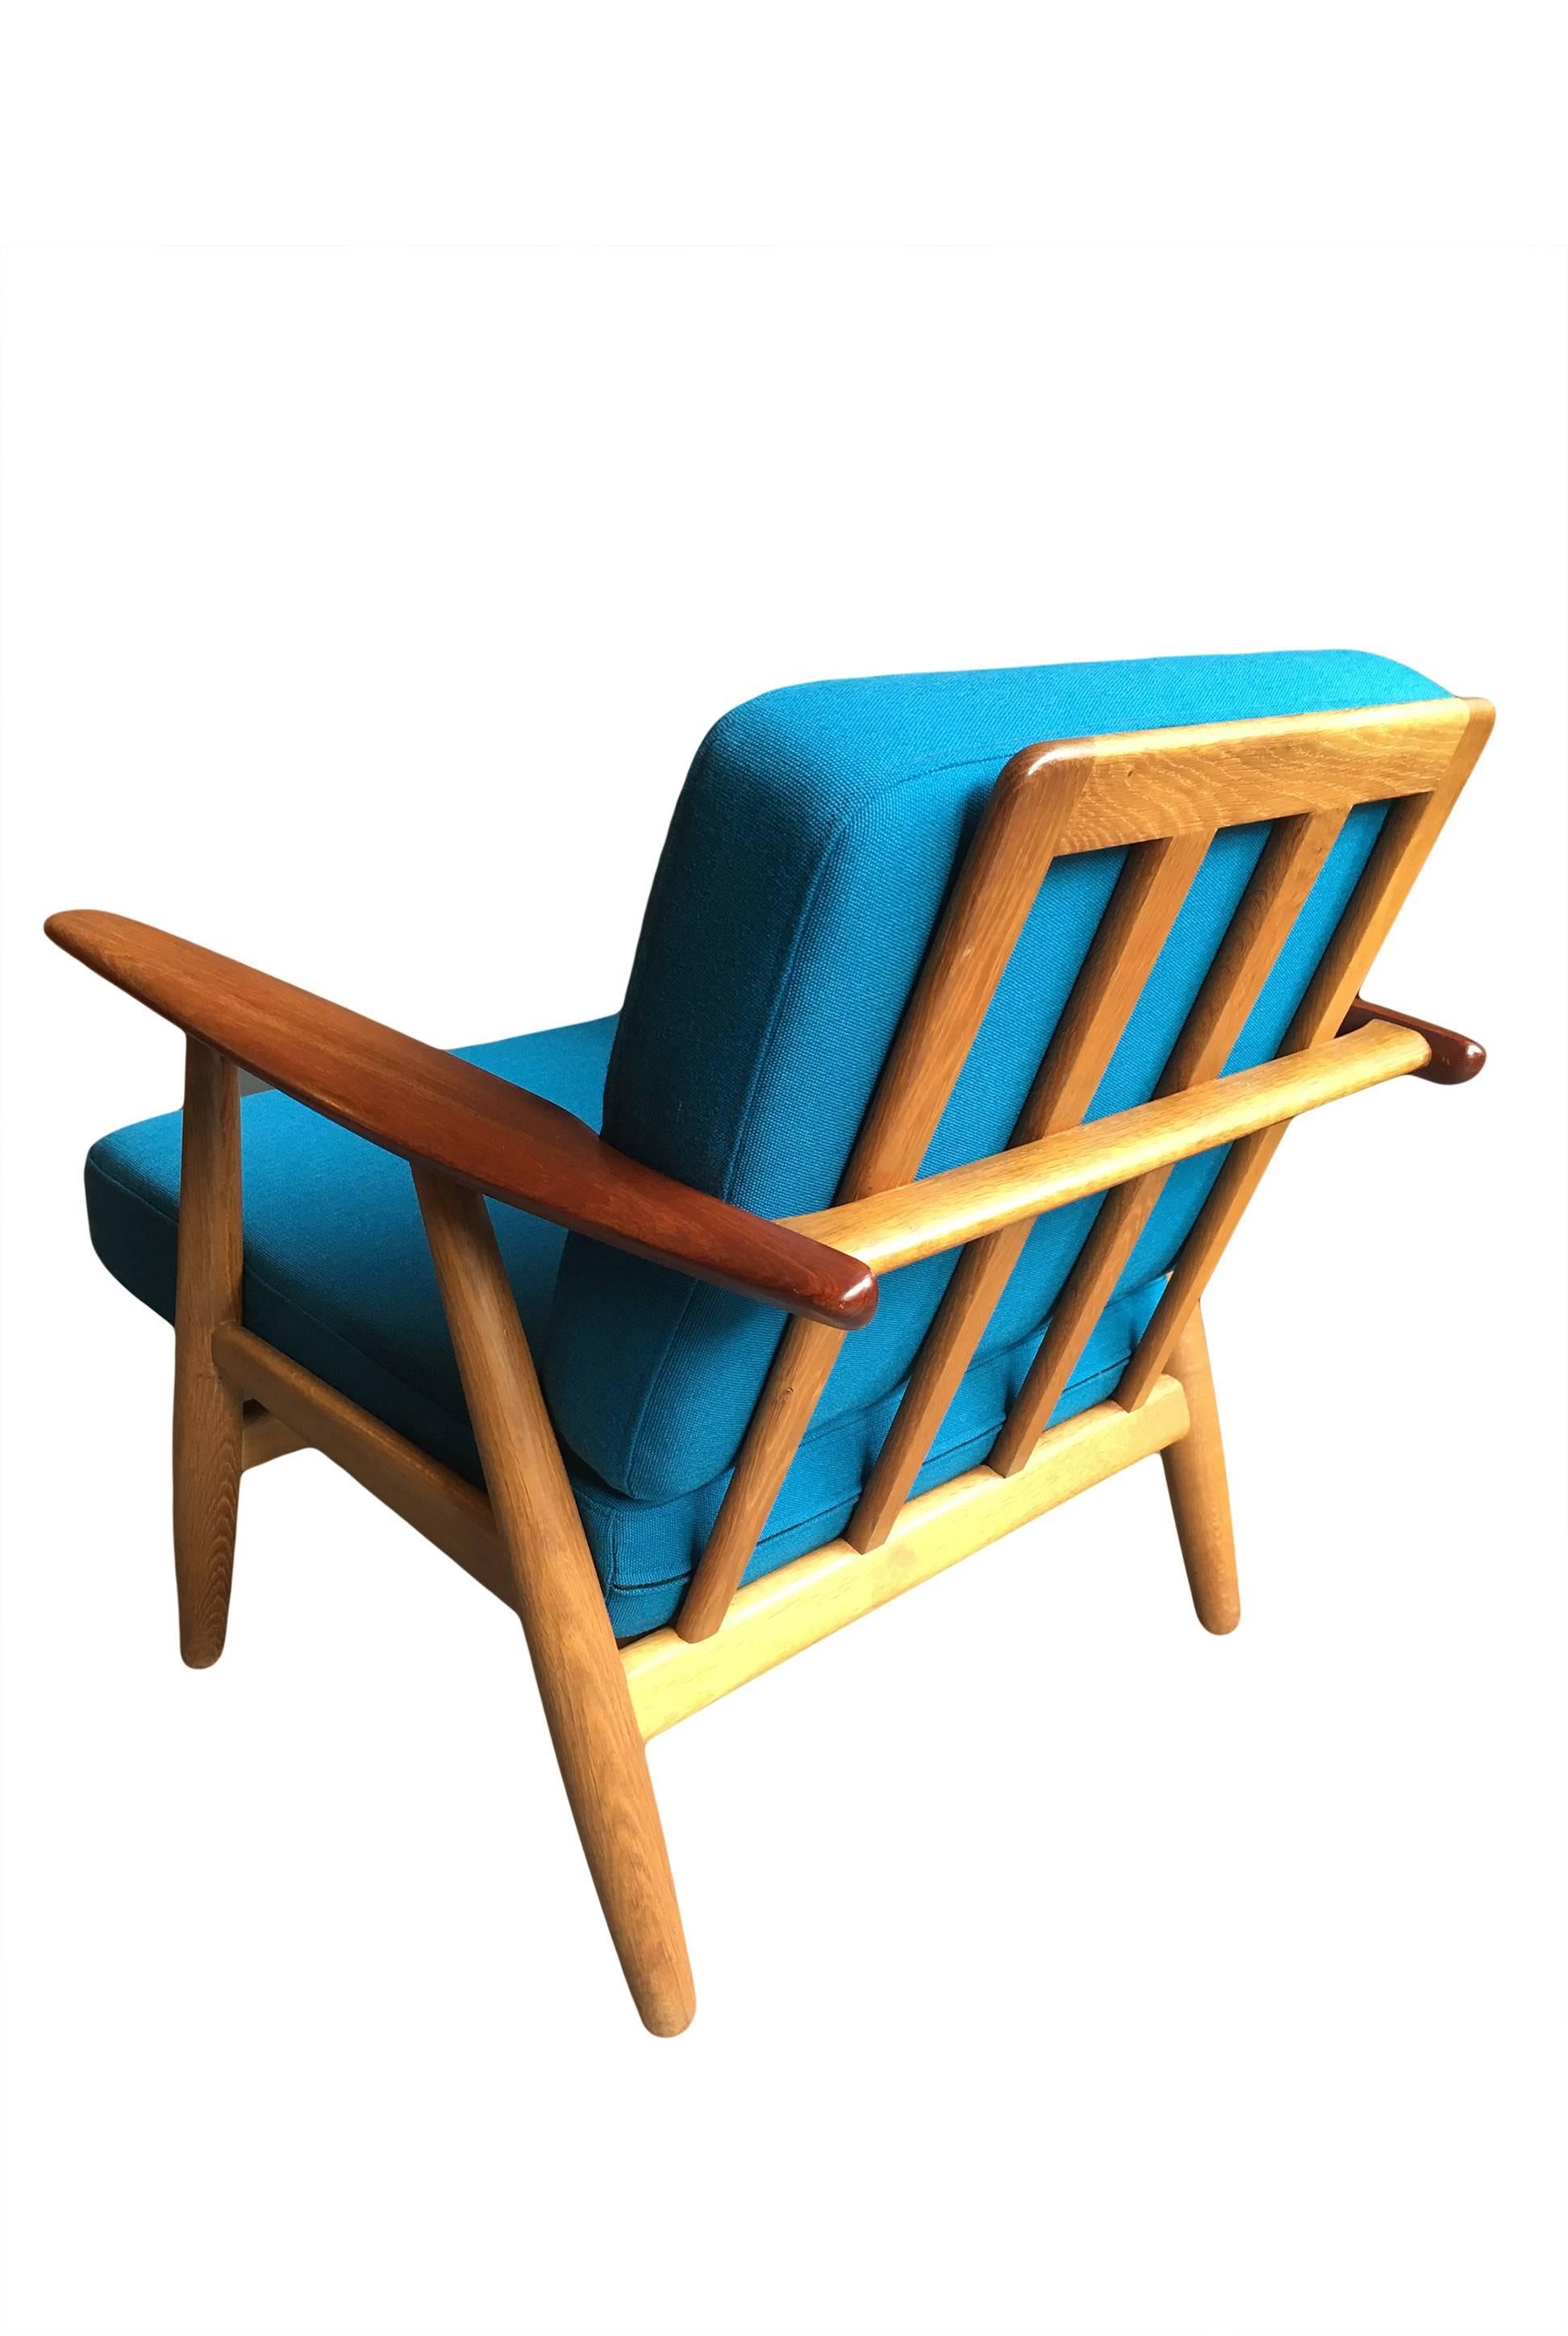 An original Hans J Wegner GE240 'cigar' chair. Produced by GETAMA, Denmark in the late 1950s. Oak frame with teak arms. Completely re-upholstered using Bute Teal fabric. Superb condition. Original Wegner/Getama stamp to underside.
U.S Shipping